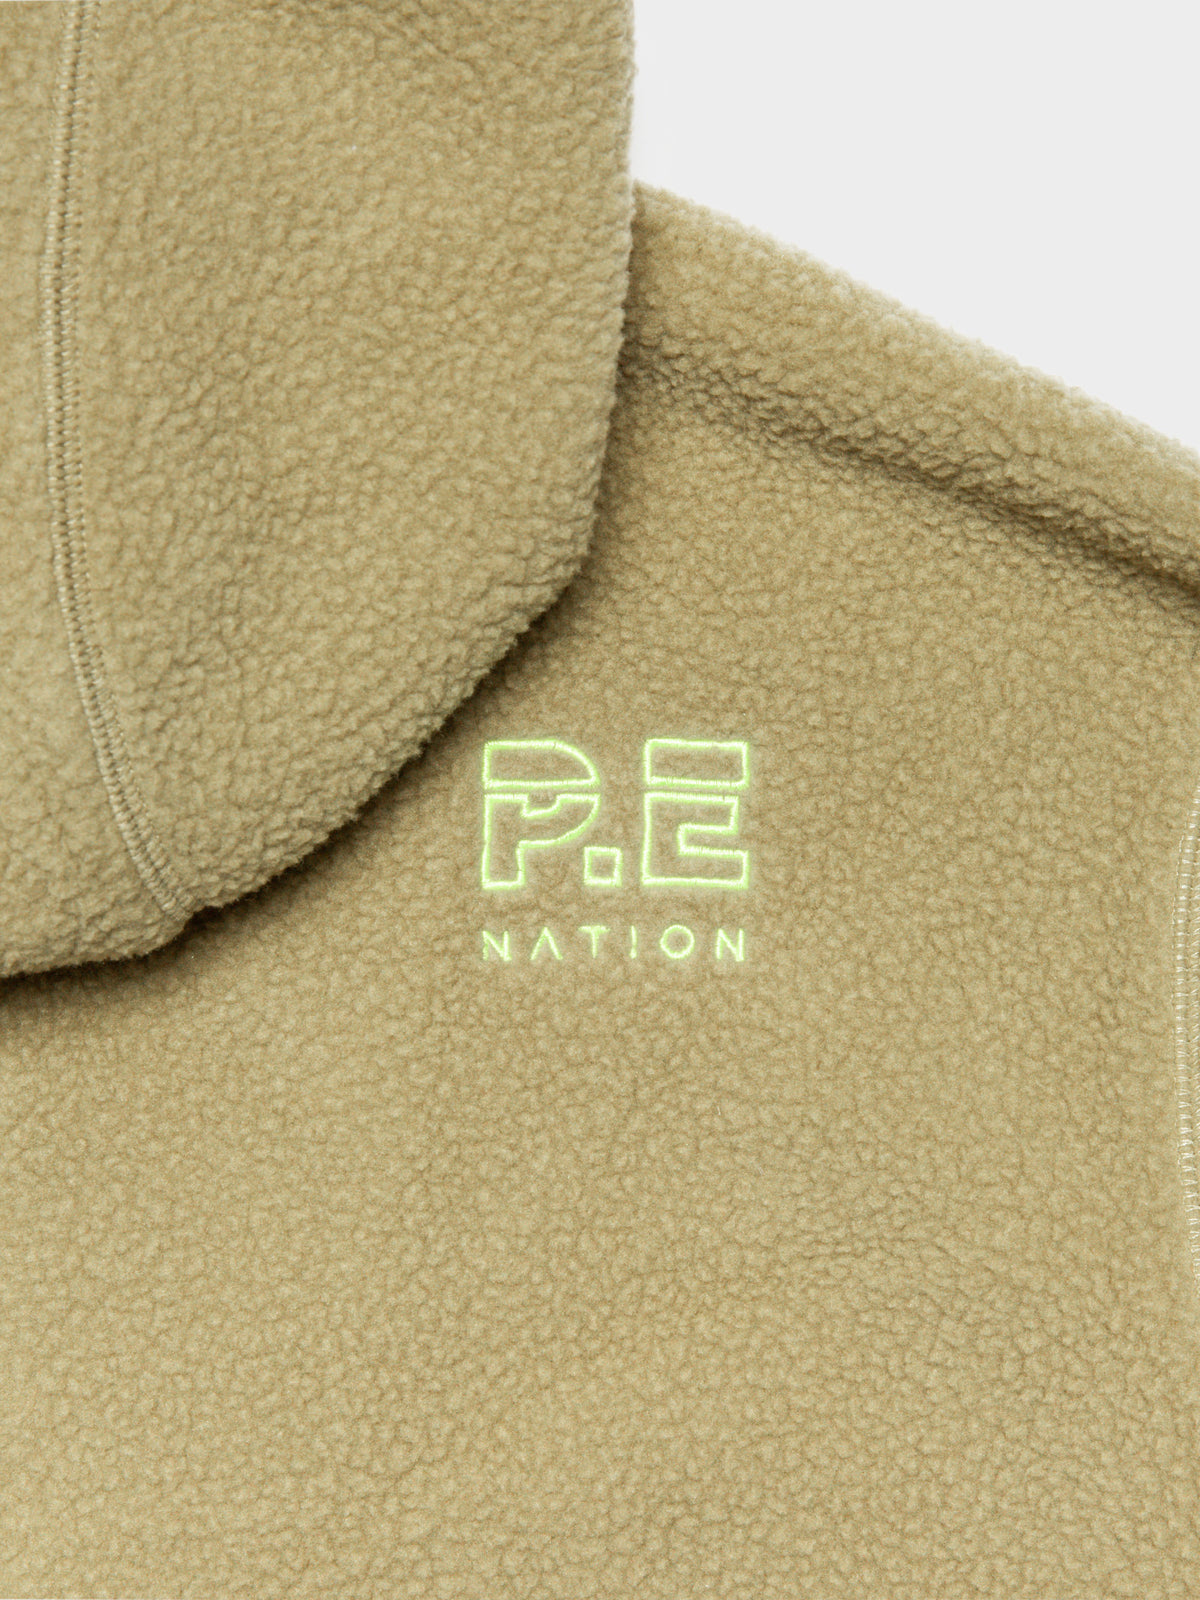 Point In Line Jacket in Olive Gray